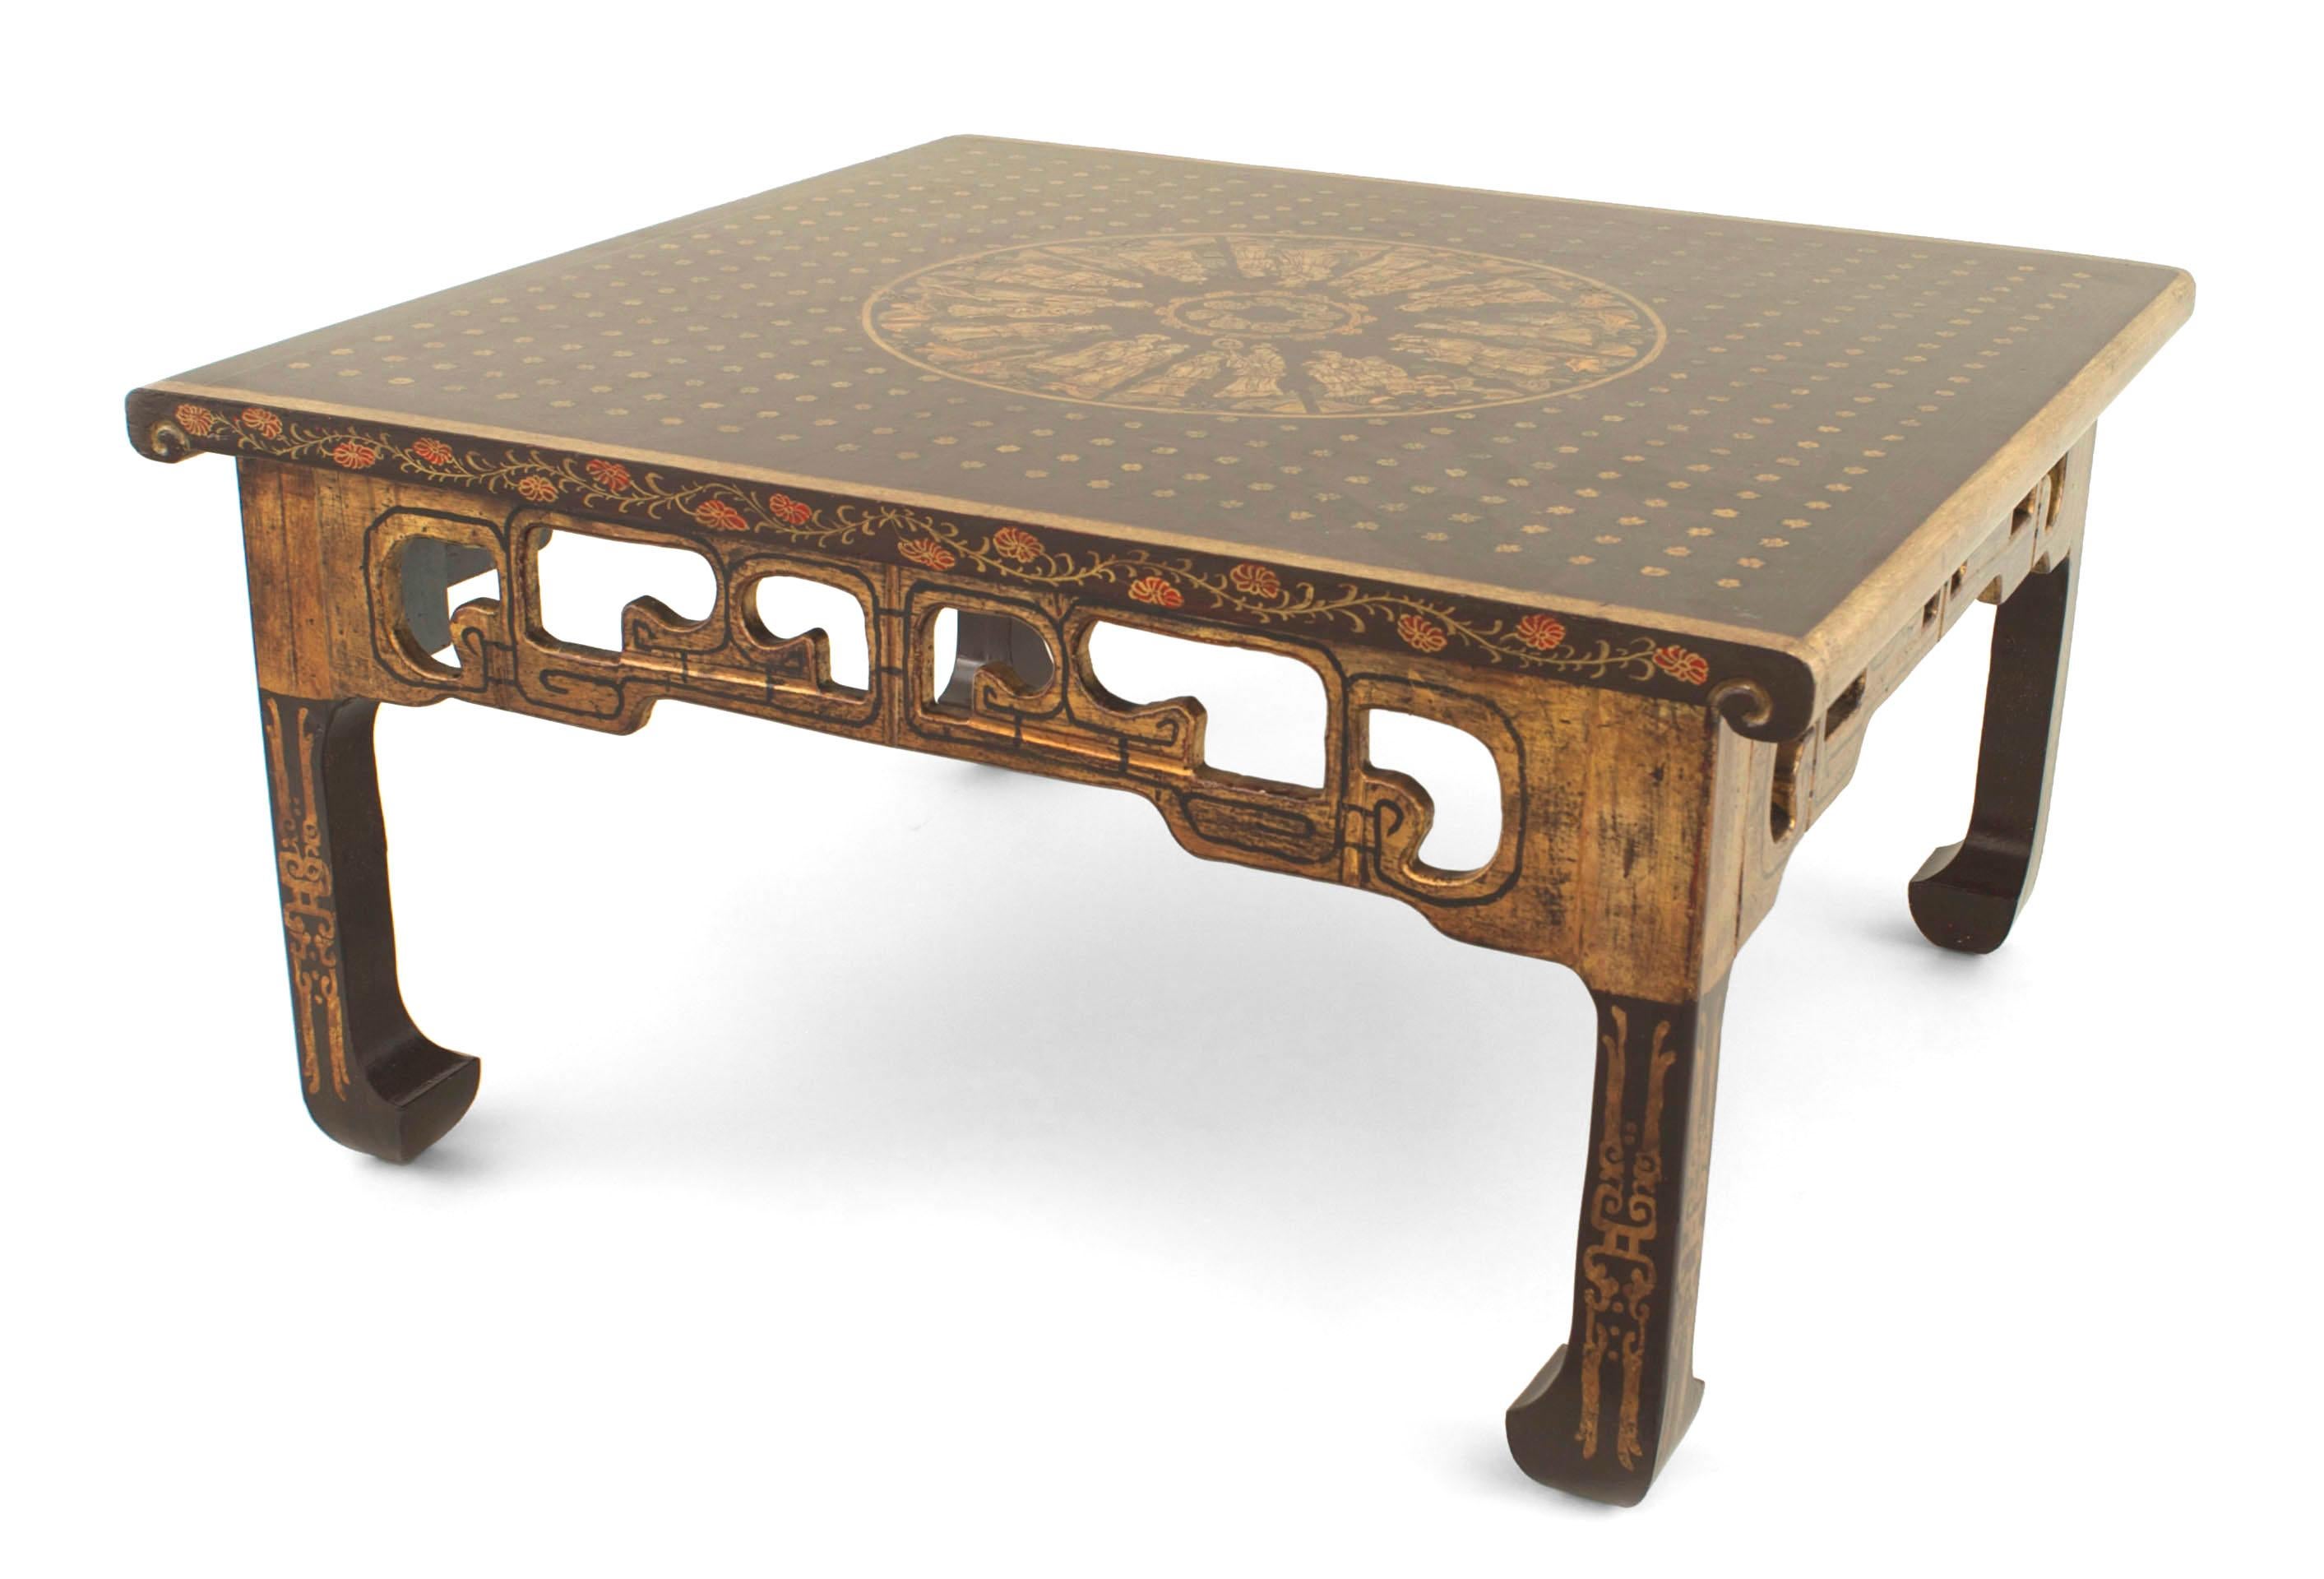 Asian Chinese-style (20th Century) brown lacquered square coffee table with gilt star trim and a large round center medallion with figures and a geometric open apron.
